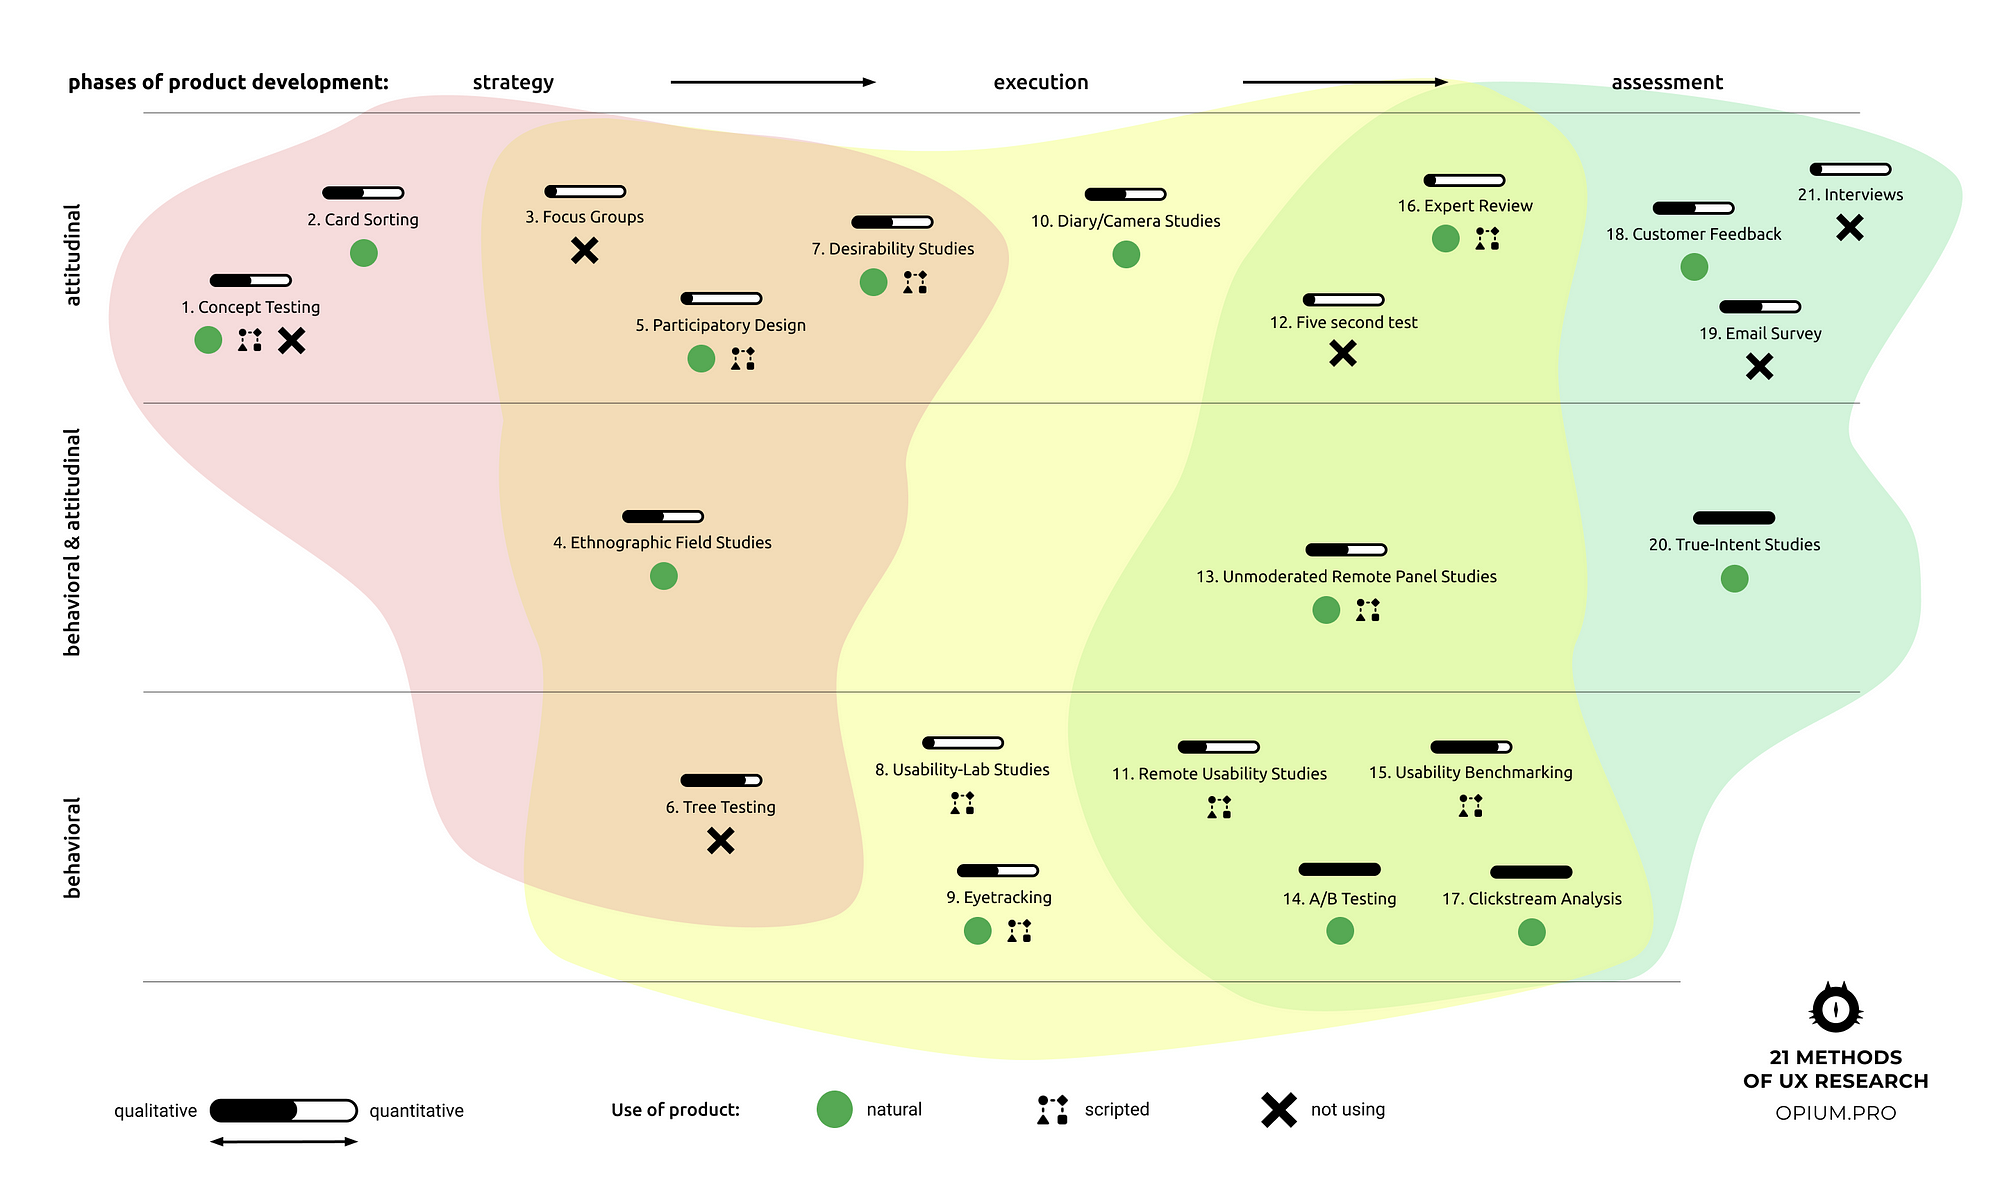 A History of the UX Research Tools Map